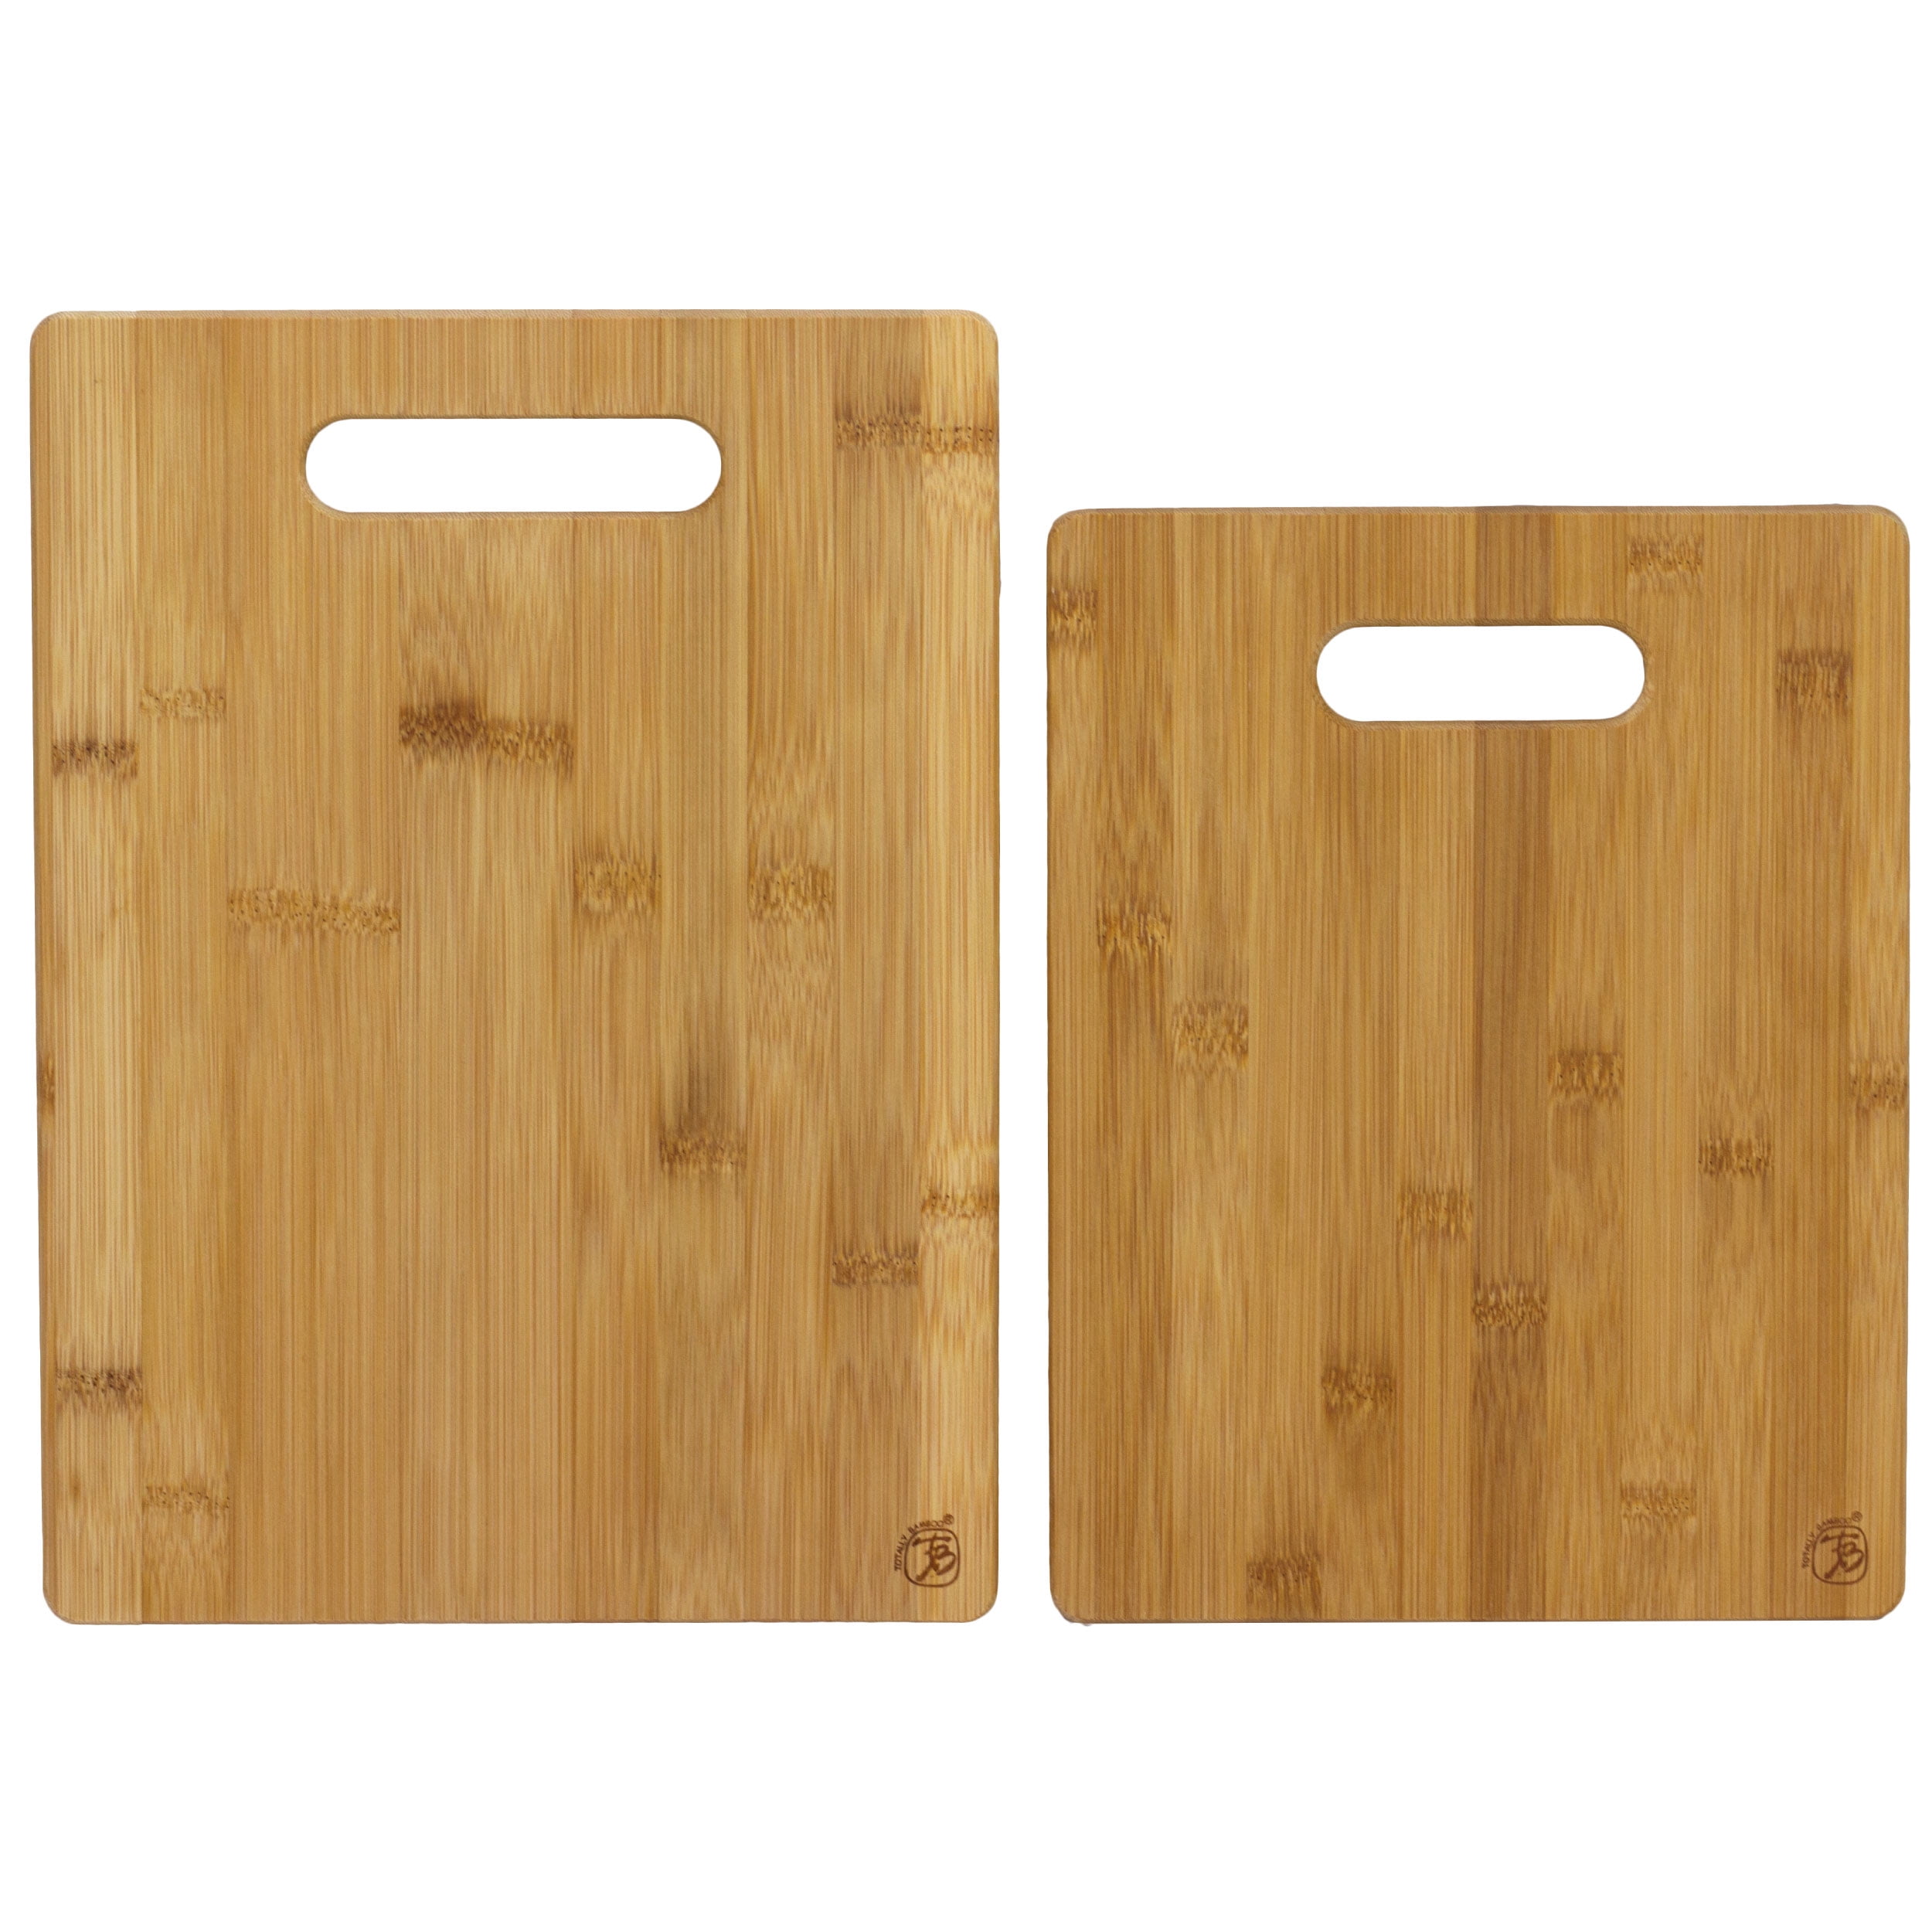 Brite Concepts Mini Bamboo Cutting Board 6 by 9 Inches Genuine Home for sale online 